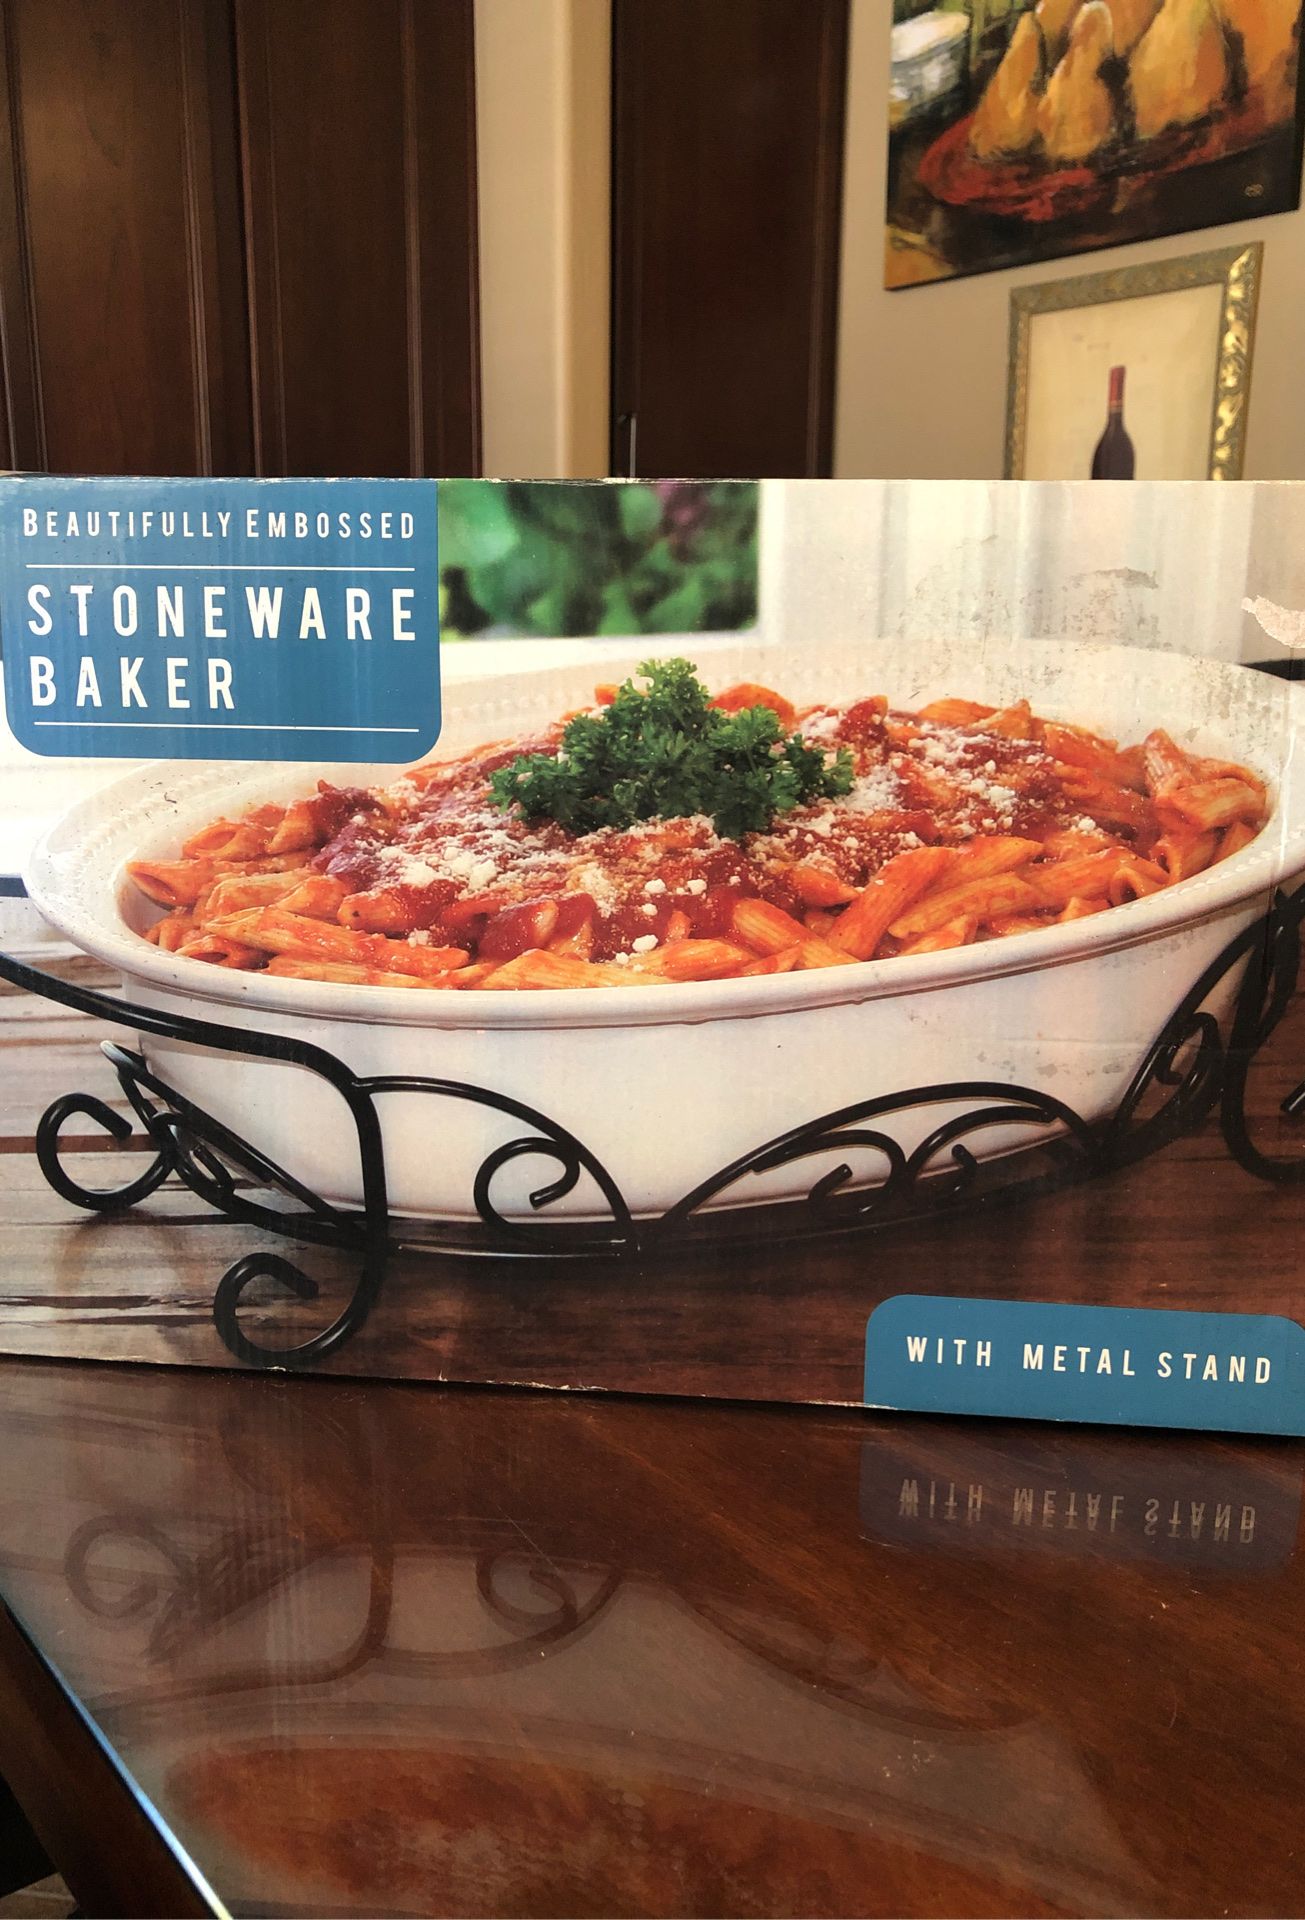 Brand new in box stoneware baker - your dish direct from oven to table!